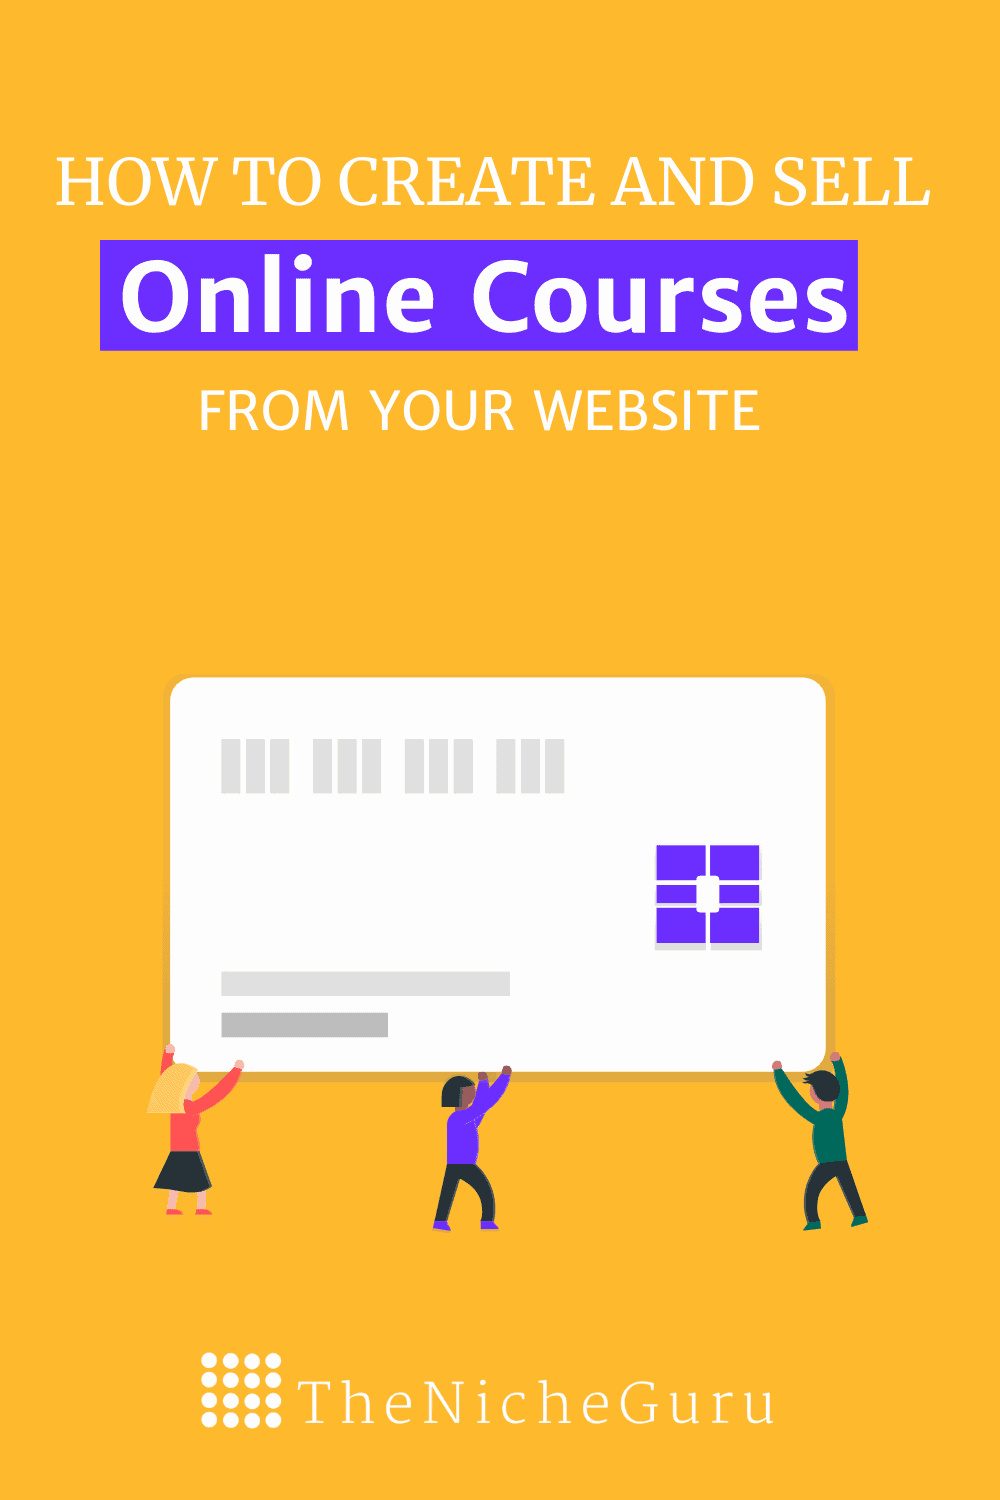 Creating an online course and selling it from your website was never easier. Check this step by step guide and learn how you can do it easily. Includes LSM WordPress plugins, best landing page techniques, how to promote your course, and much more. #OnlineCourse #Wordpress #LMS #MemberPress #Instapage